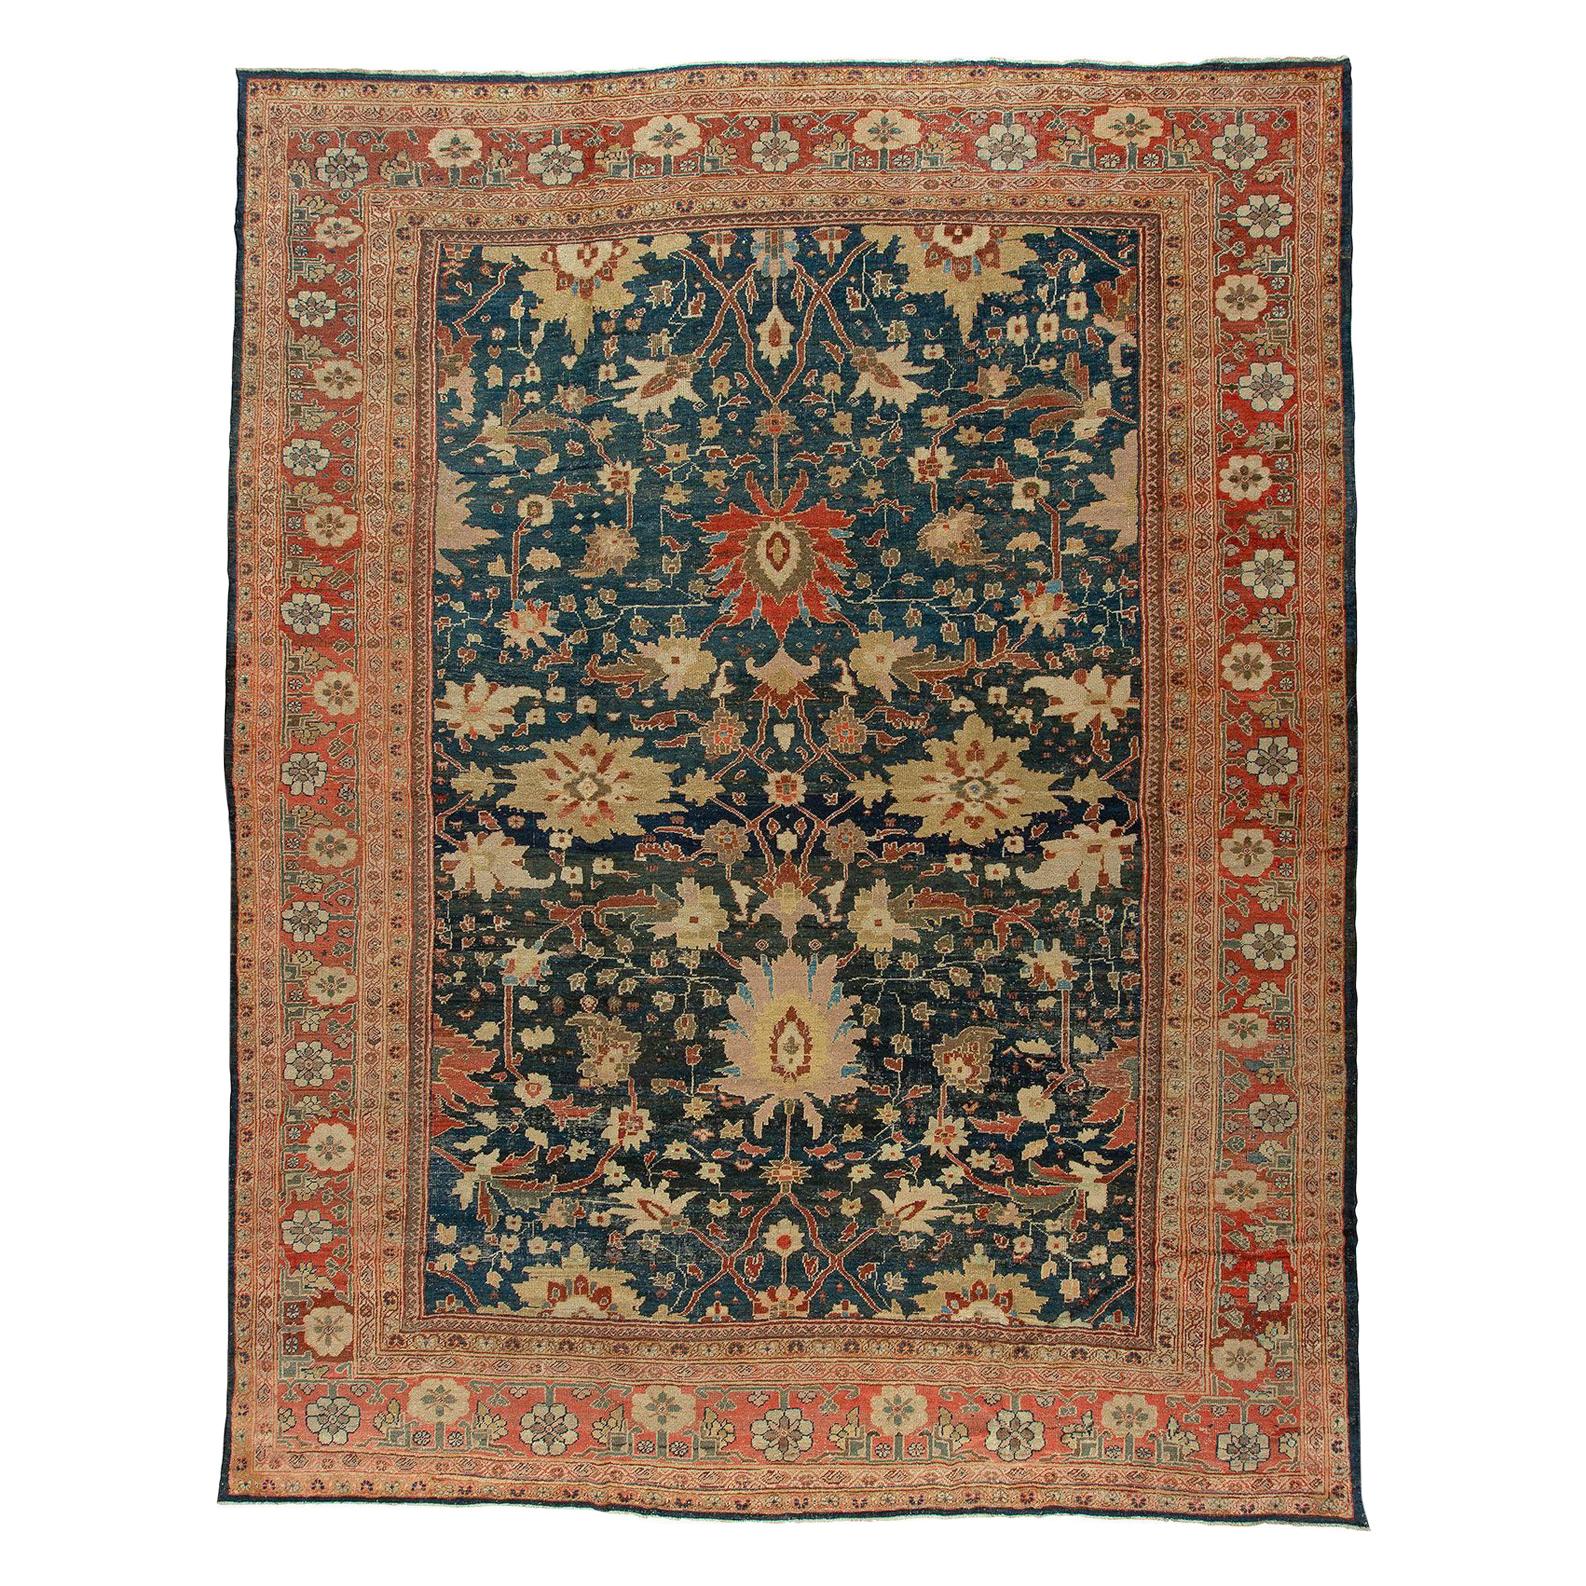 Phenomenal Large Scale Antique Sultanabad Mahal Persian Carpet For Sale